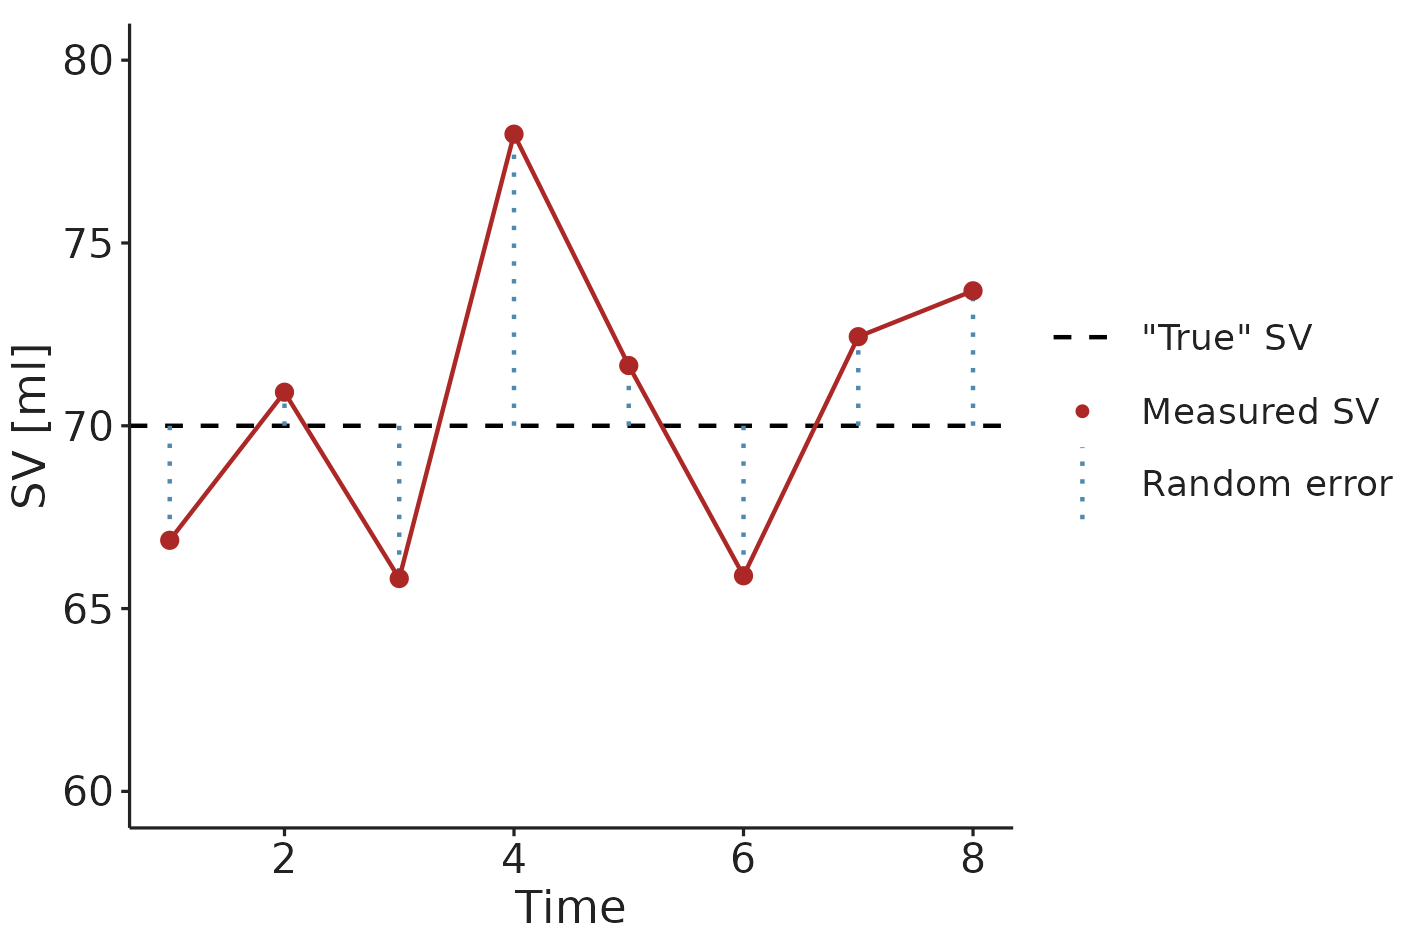 An illustration of regression towards the mean. An extreme SV measurement is likely followed by a measurement closer to the “true” (mean) SV.